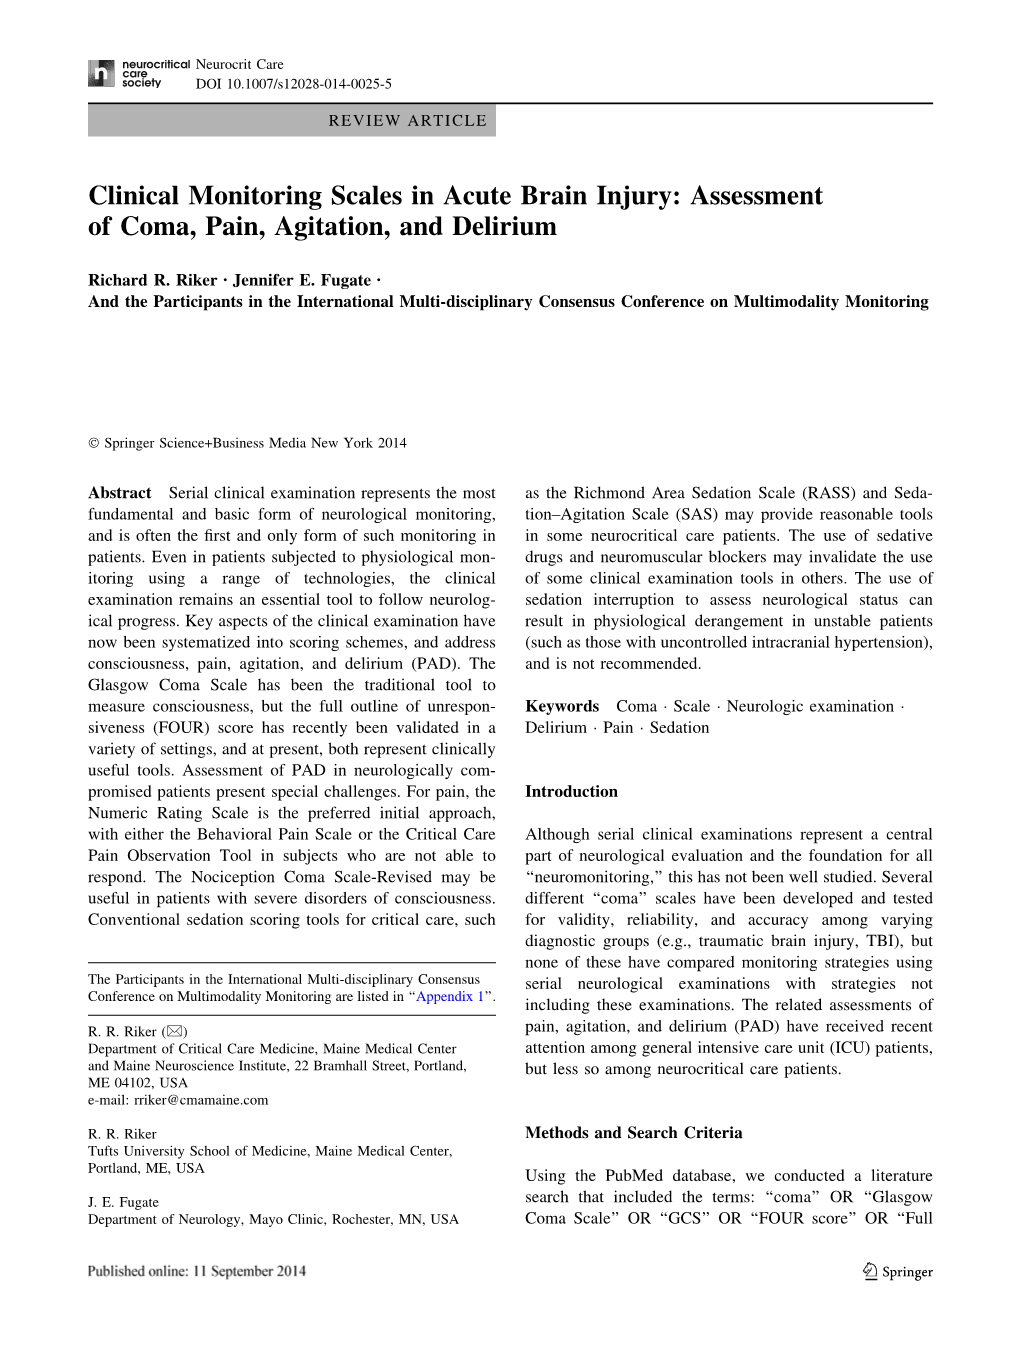 Clinical Monitoring Scales in Acute Brain Injury: Assessment of Coma, Pain, Agitation, and Delirium